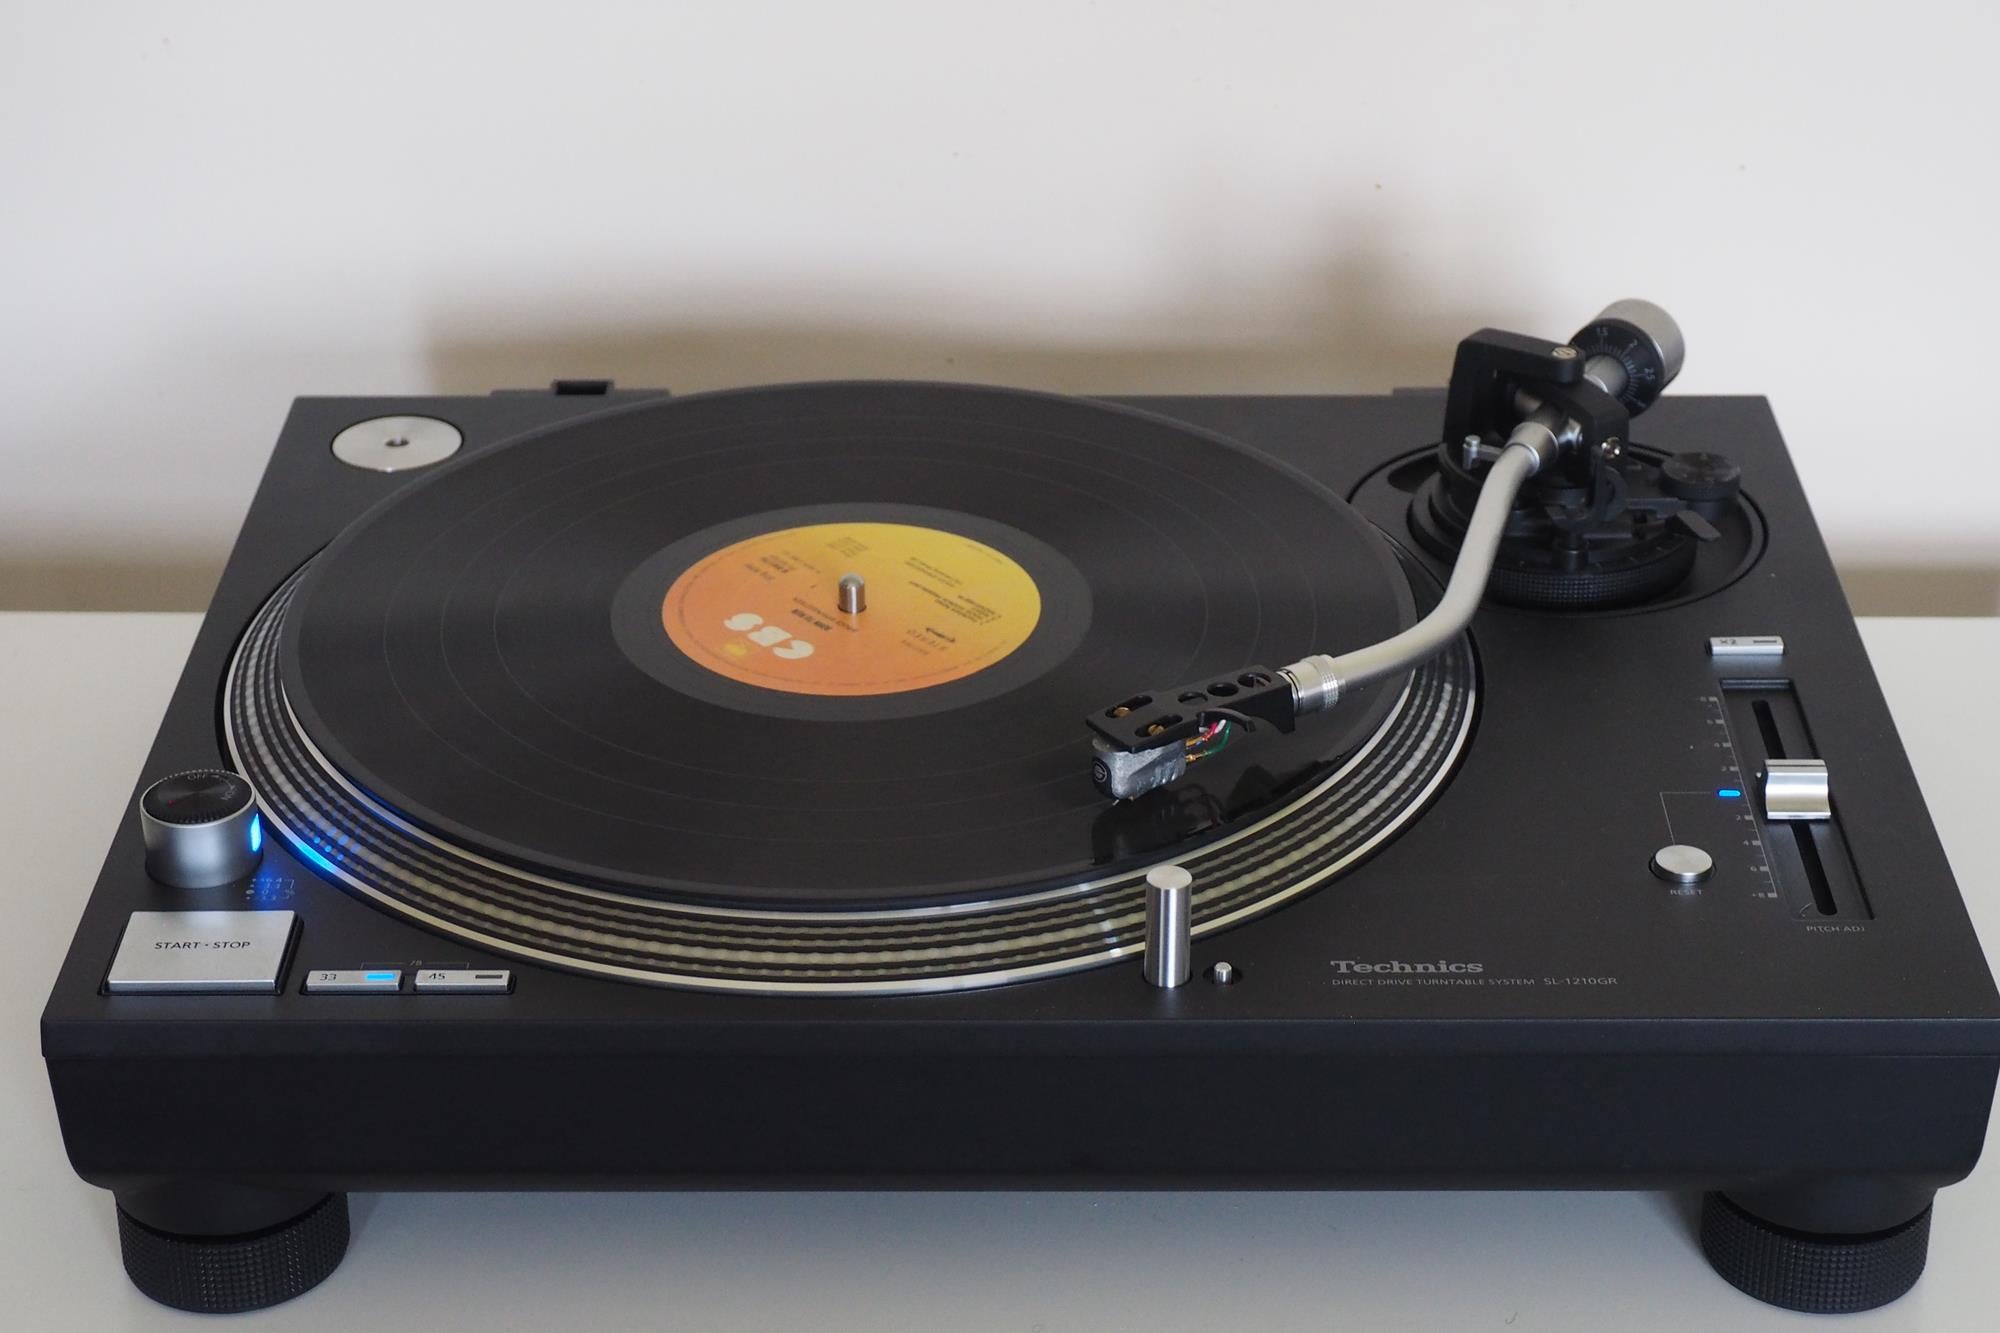 Technics SL-1200GR turntable with vinyl record playing.